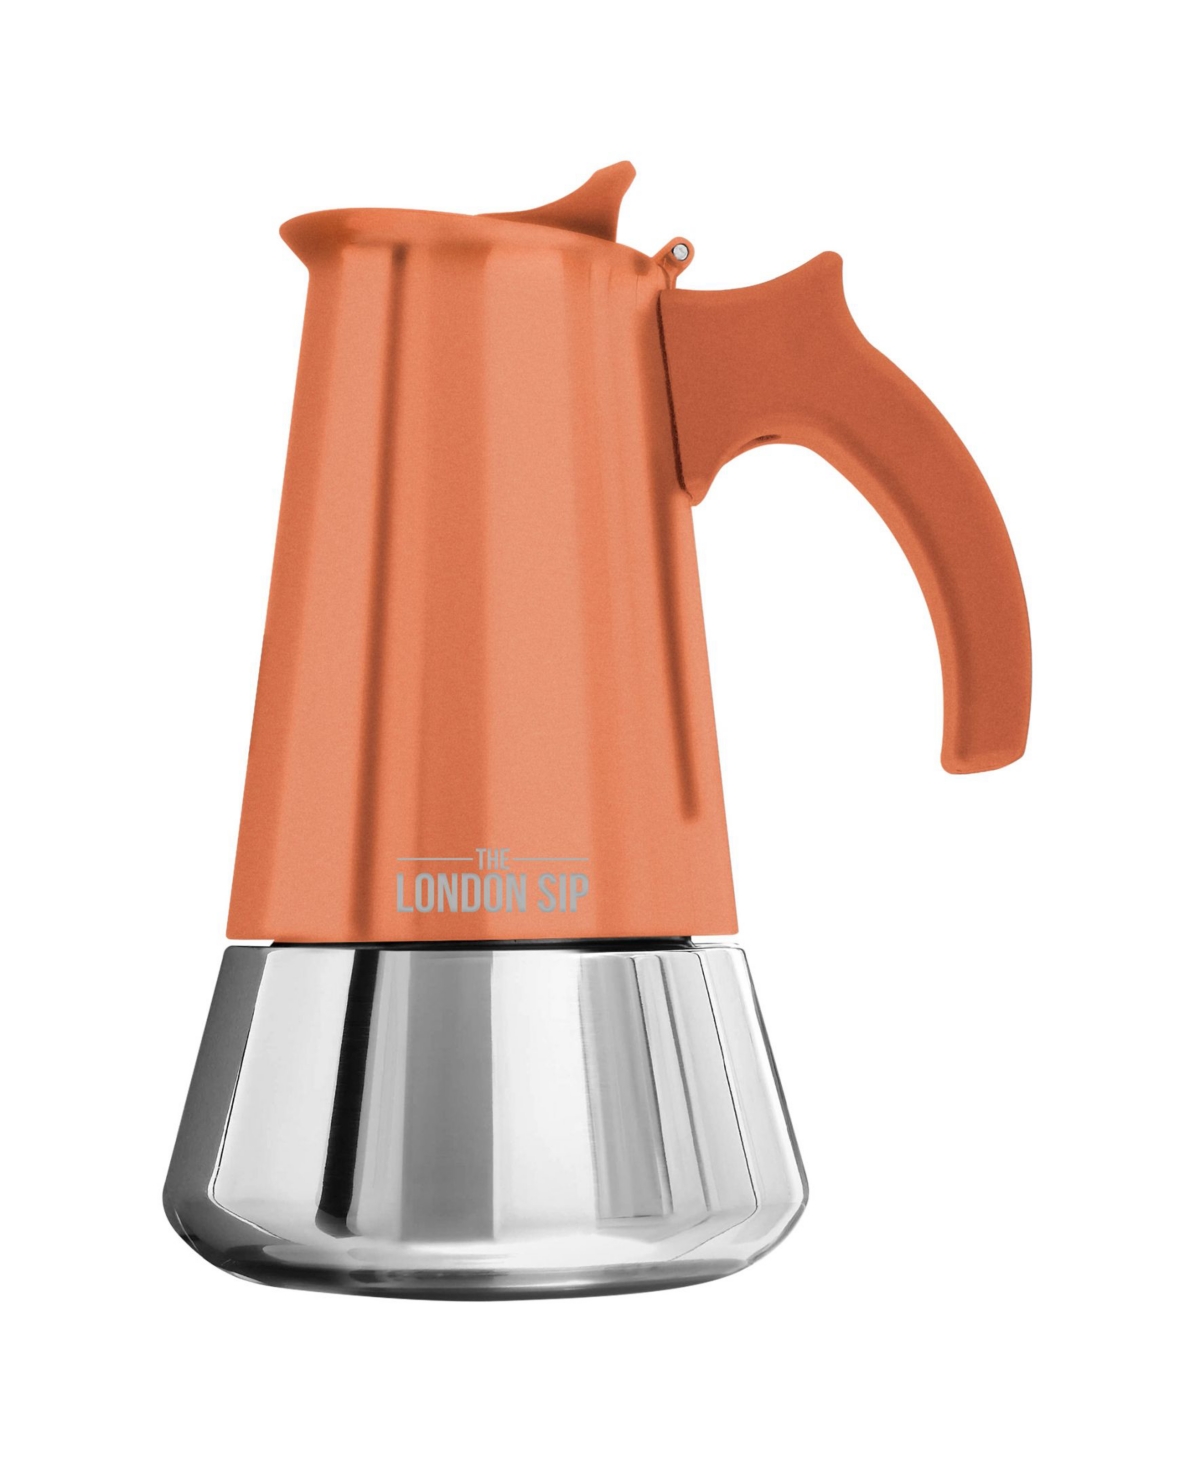 London Sip Stainless Steel Coffee Maker 6-cup In Copper